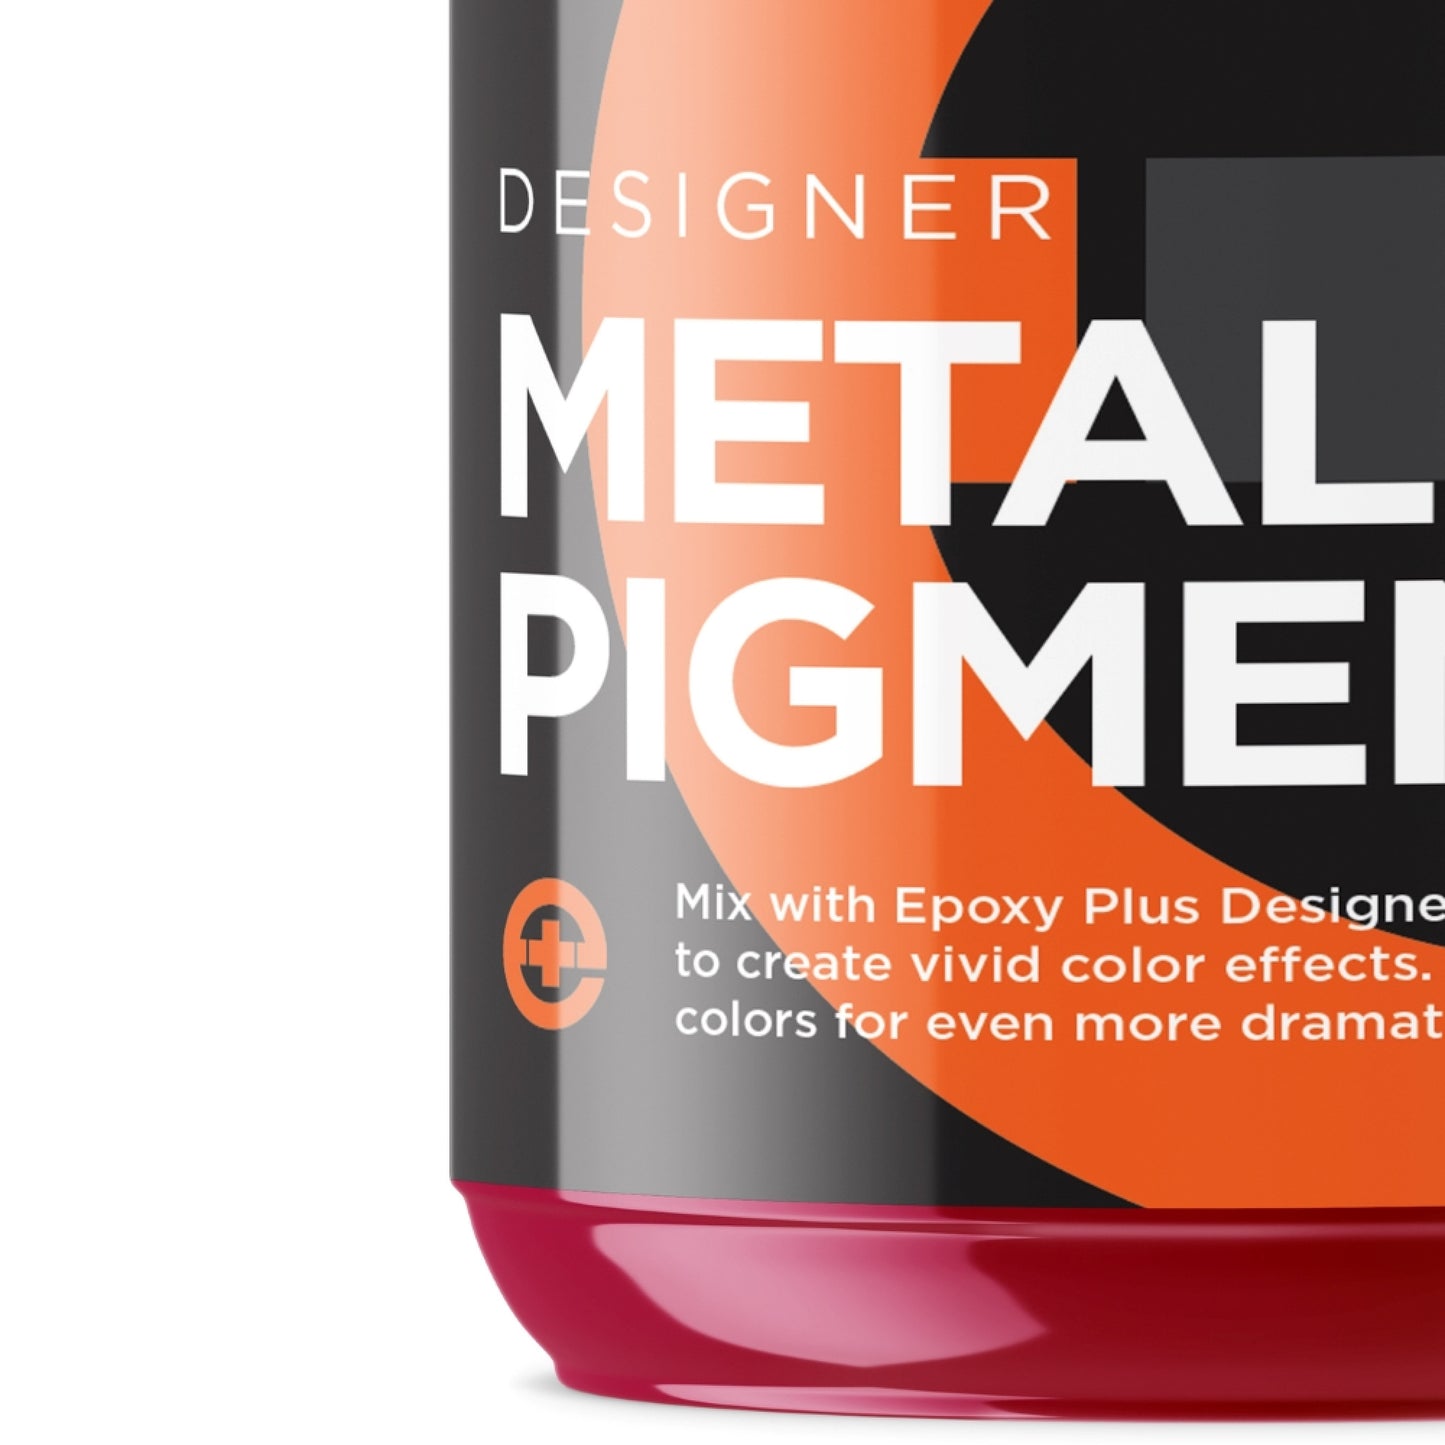 Epoxy Plus Bubblegum Metallic Pigment - Captivate and Inspire with Dynamic Pink Hues